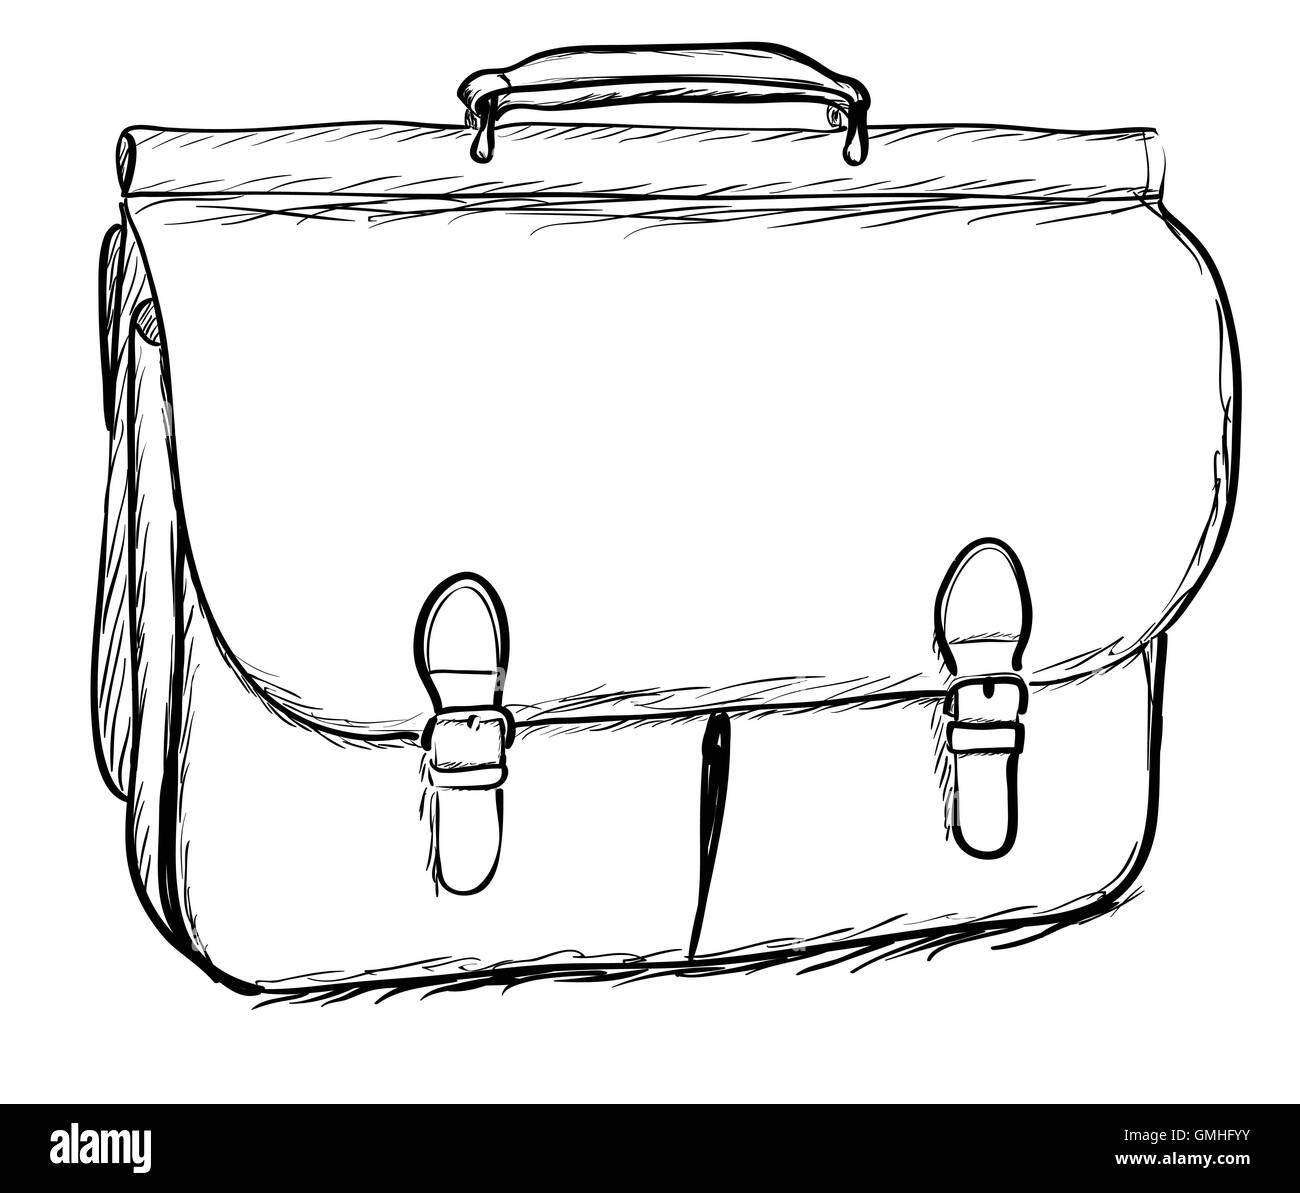 Sketch Briefcase High Resolution Stock Photography and Images - Alamy